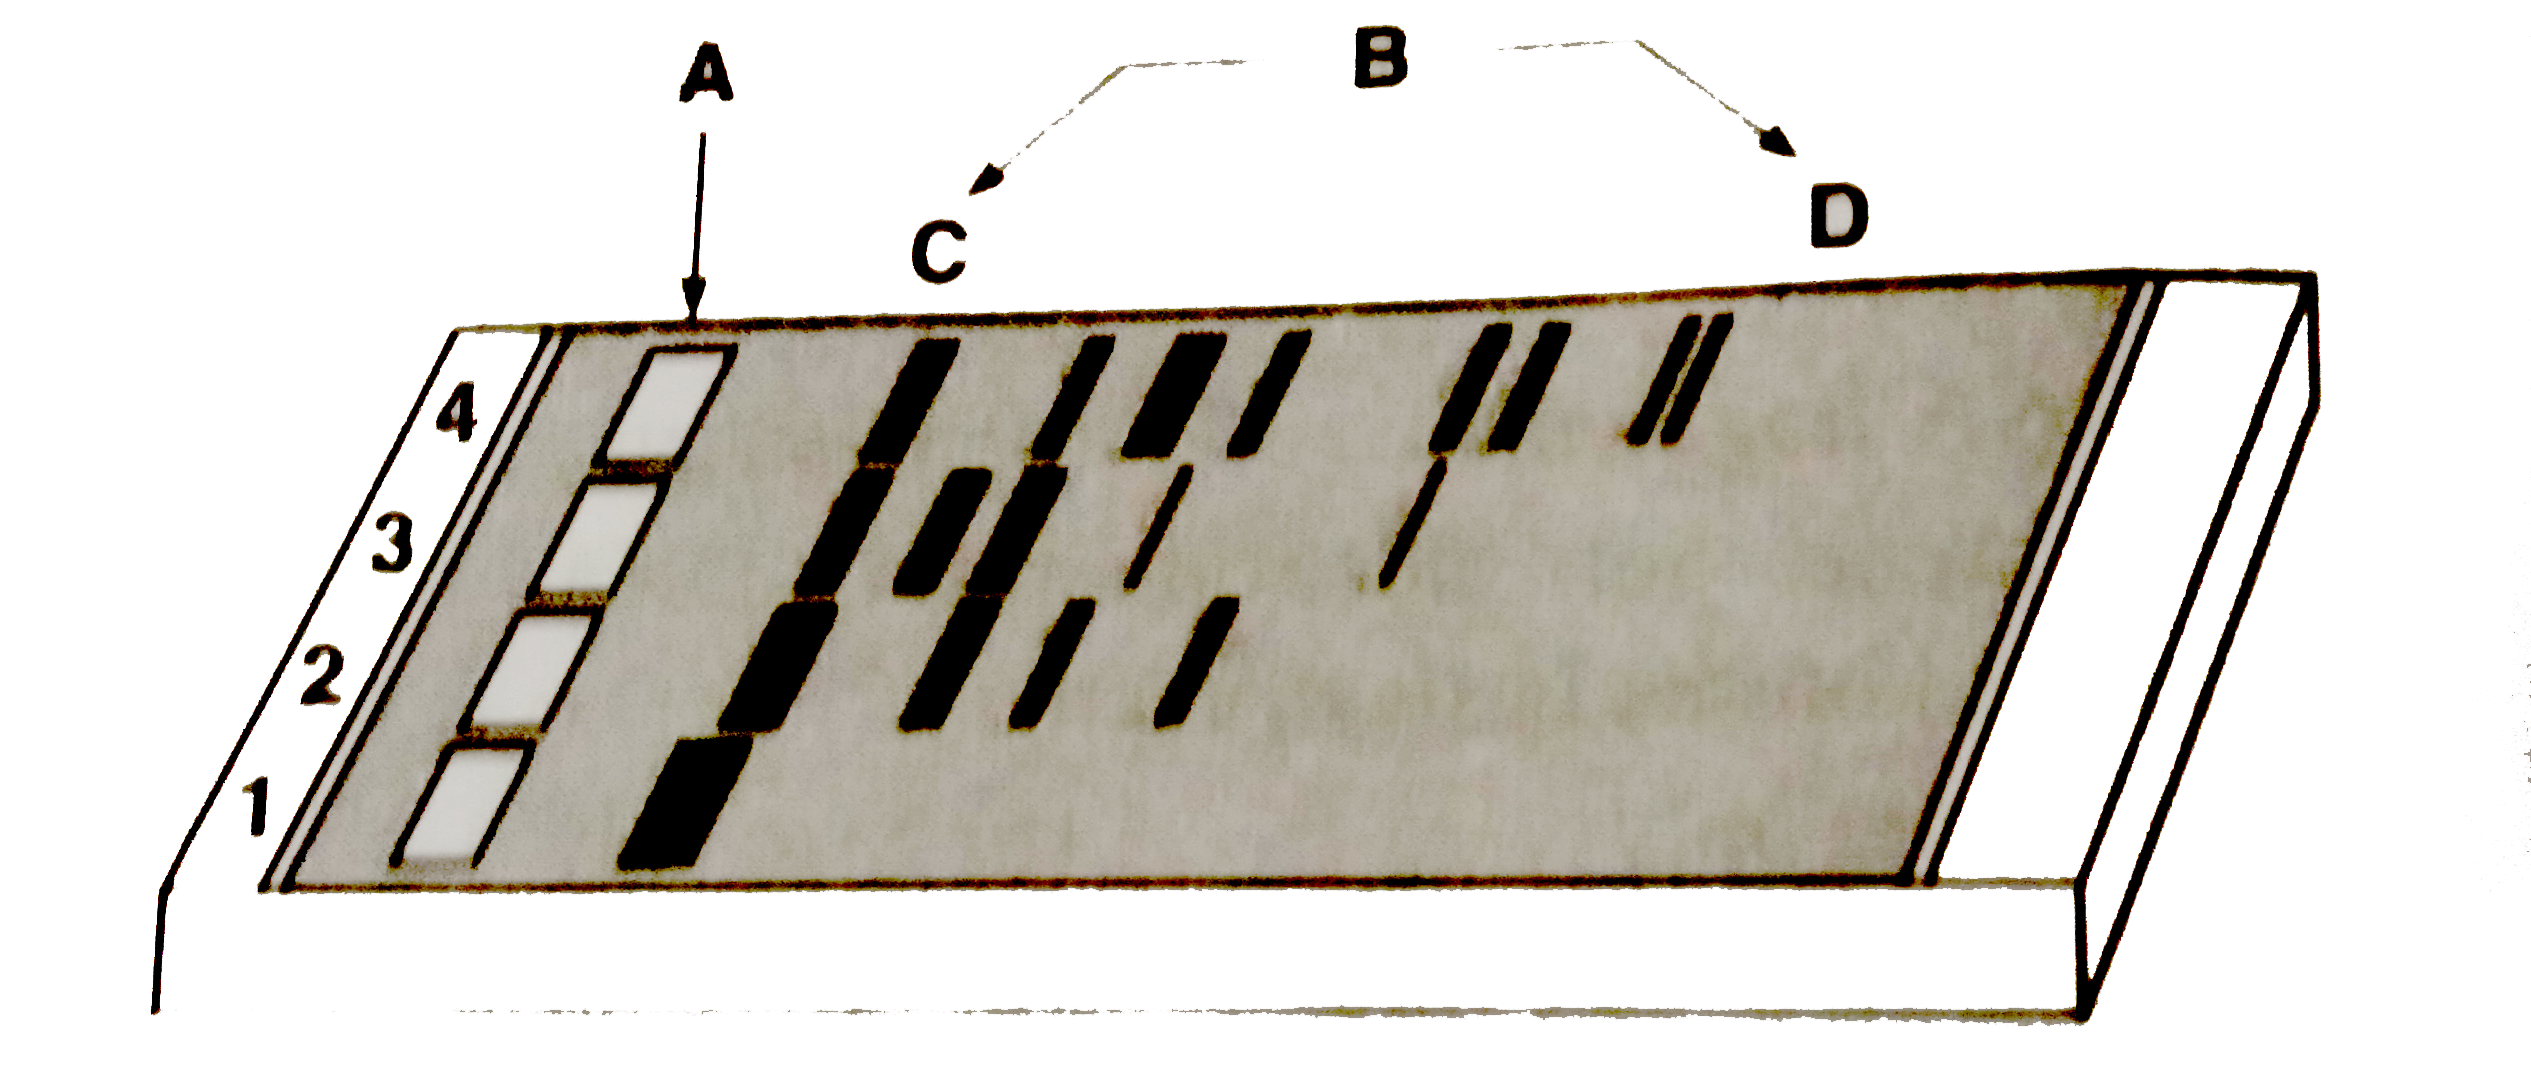 A typical agarose gel electrophoresis showing migration of undigested (lane 1) and digested set DNA fragments (lane 2 to 4) is show below. Identify A, B ,C and D by selecting the option :